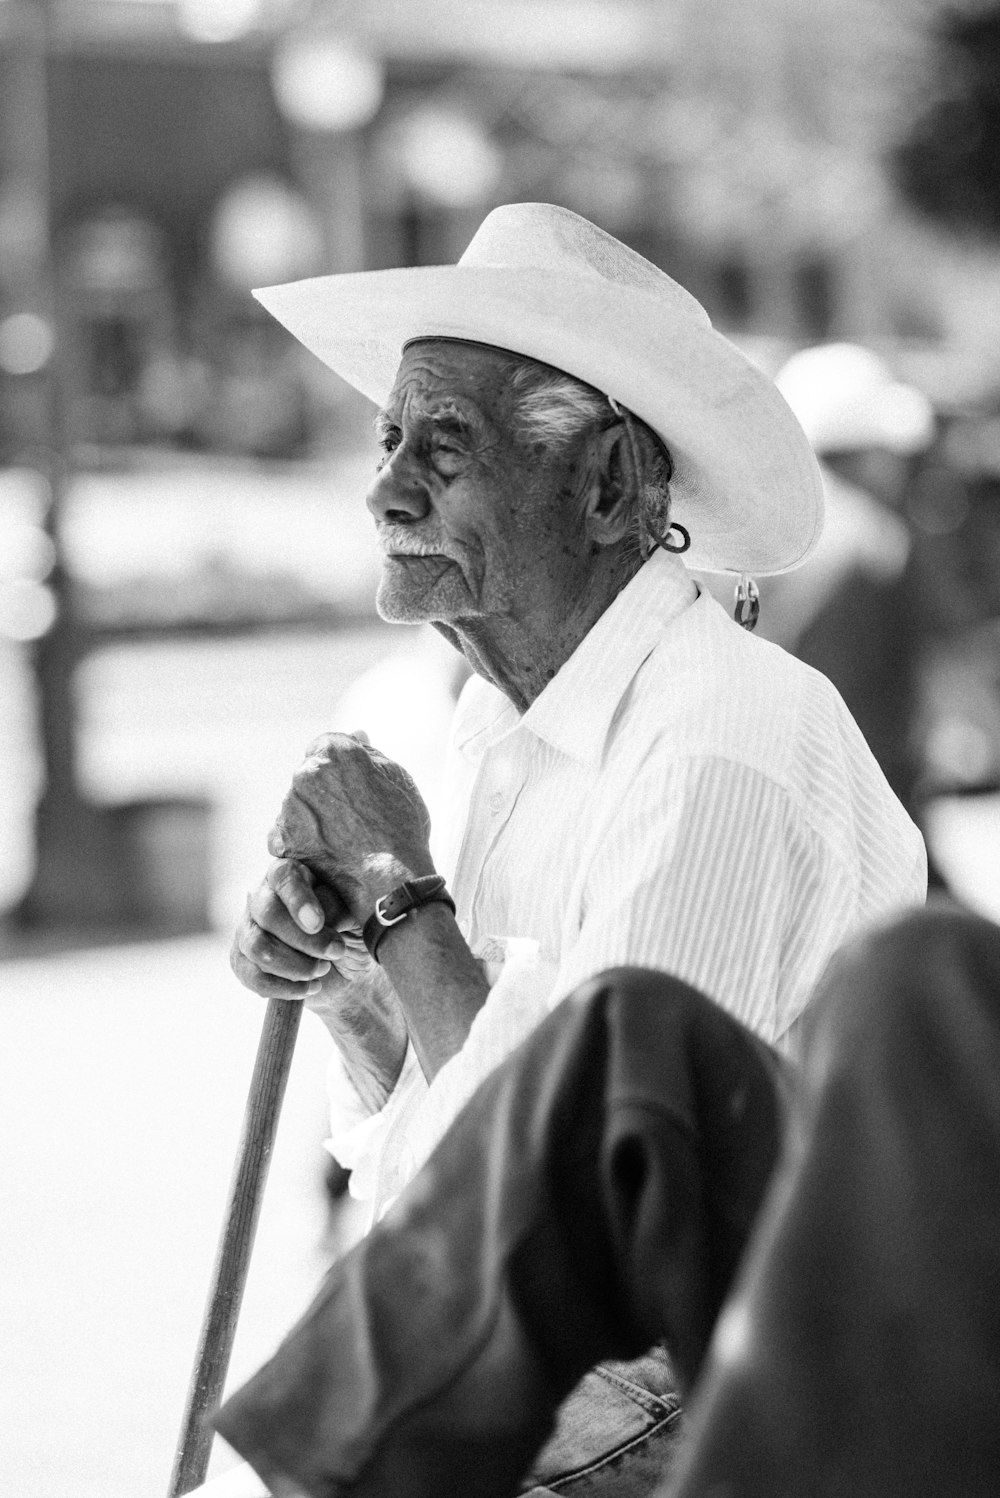 man in white dress shirt and black hat